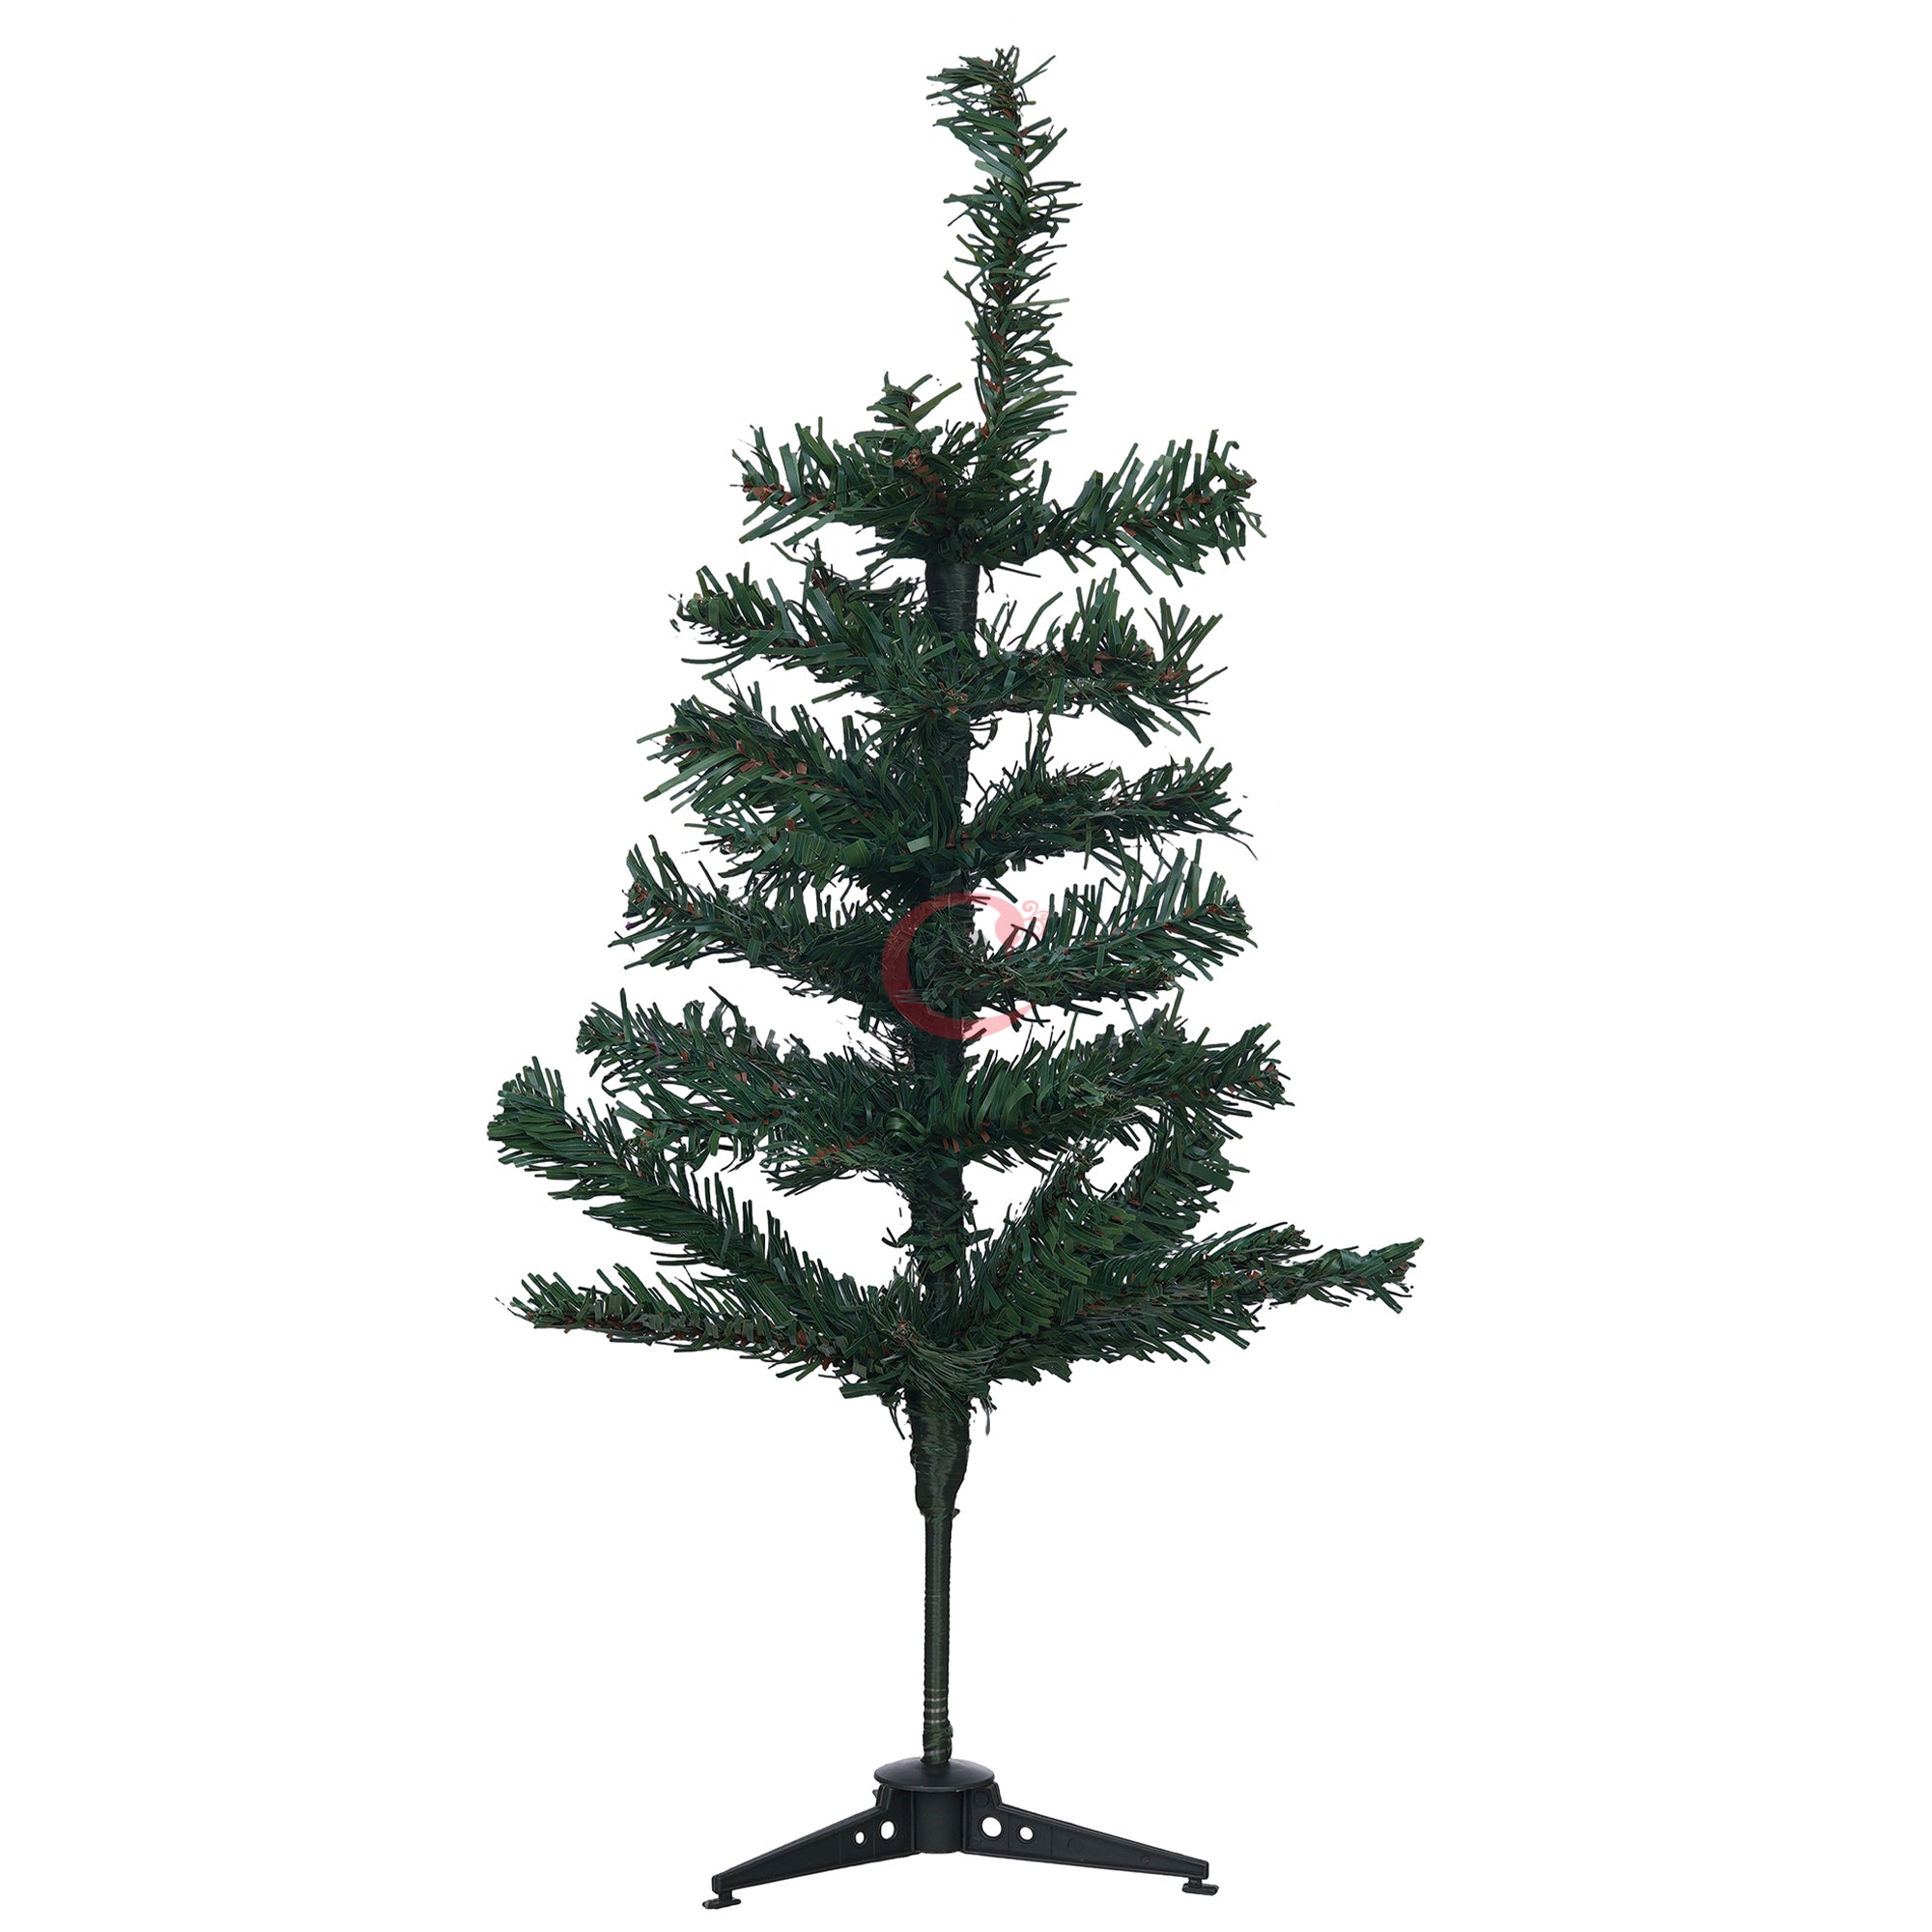 eCraftIndia 2 Feet Green Artificial Christmas Tree Xmas Pine Tree with Stand and 60 Christmas Decoration Ornaments Props - Merry Christmas Decoration Item for Home, Office, and Church 2